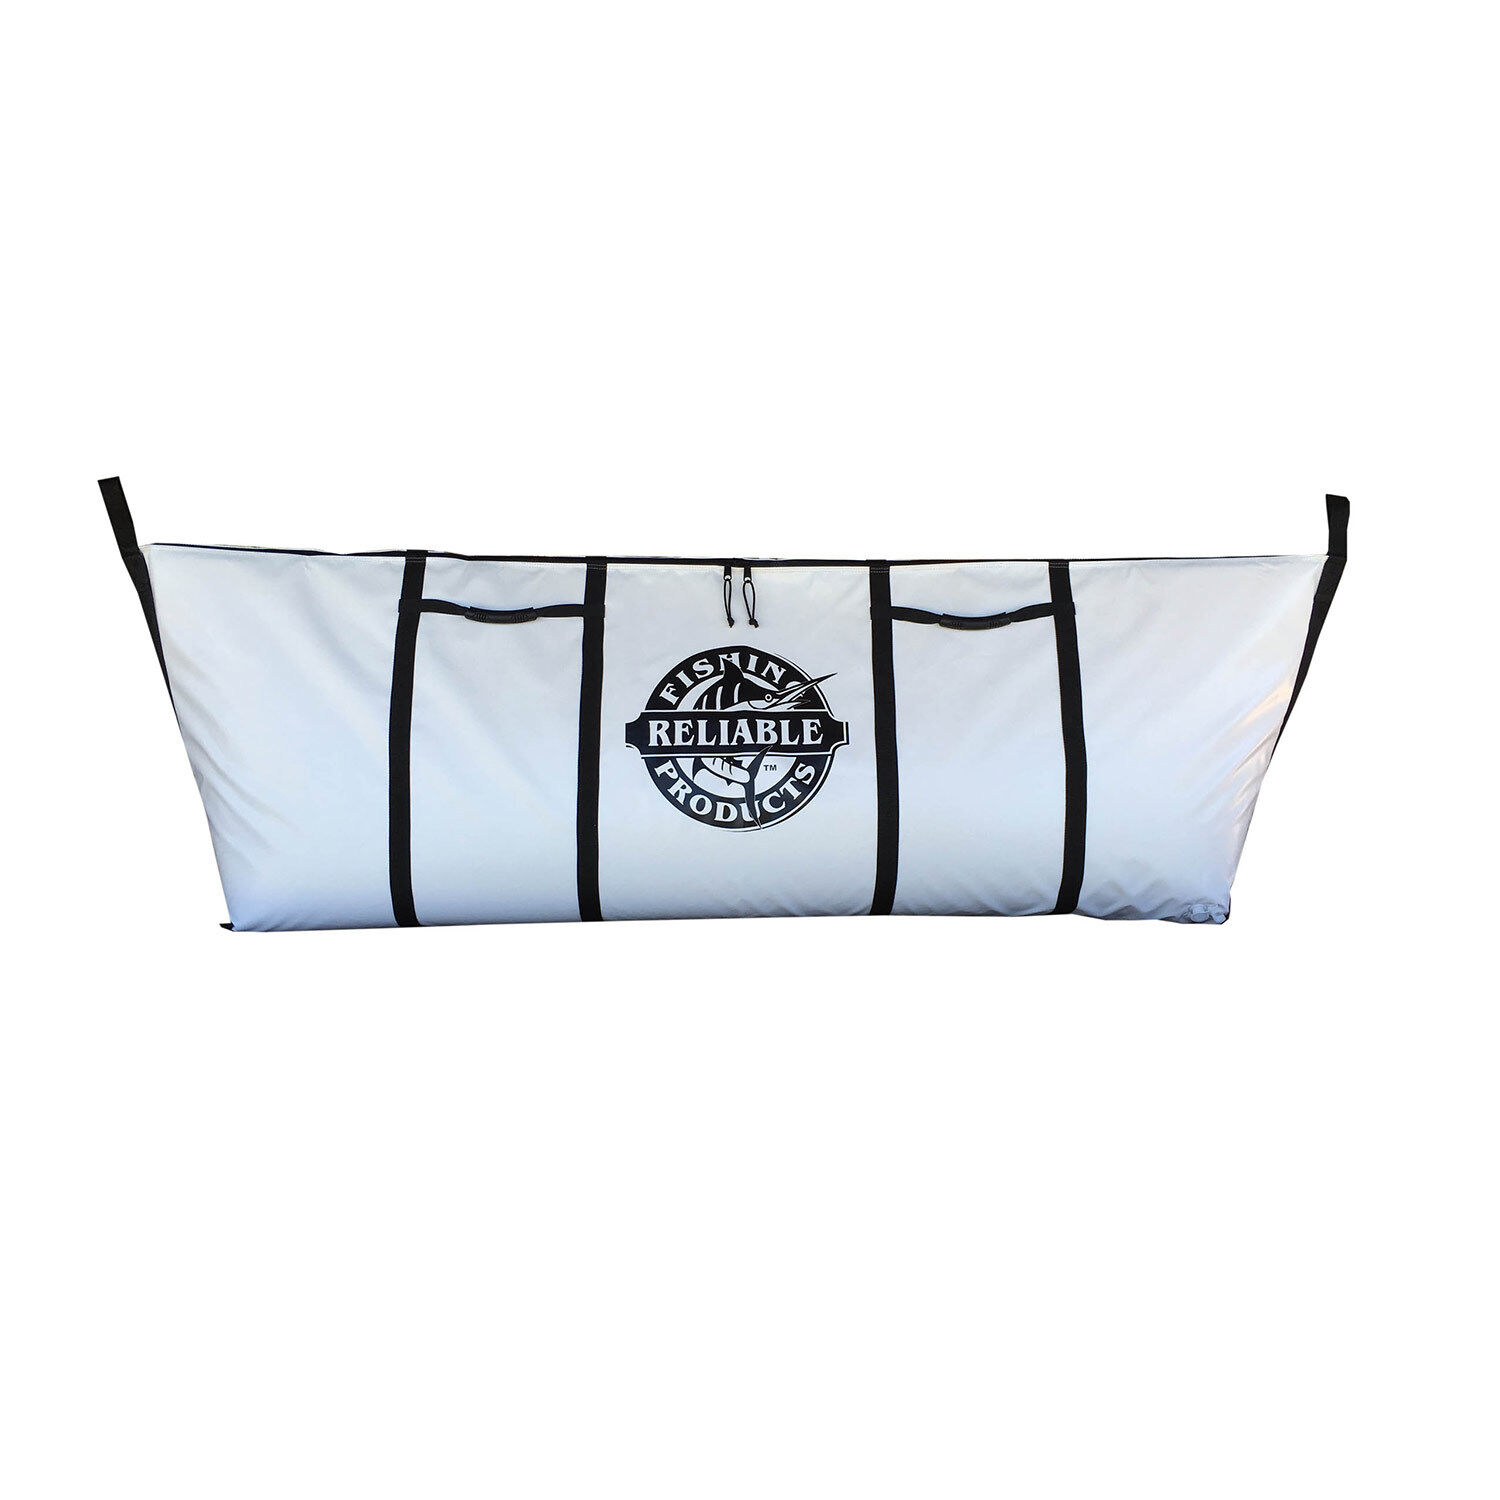 Shop Now Our Best Fish Kill Bag In USA  Fish Kill Bags  Medium